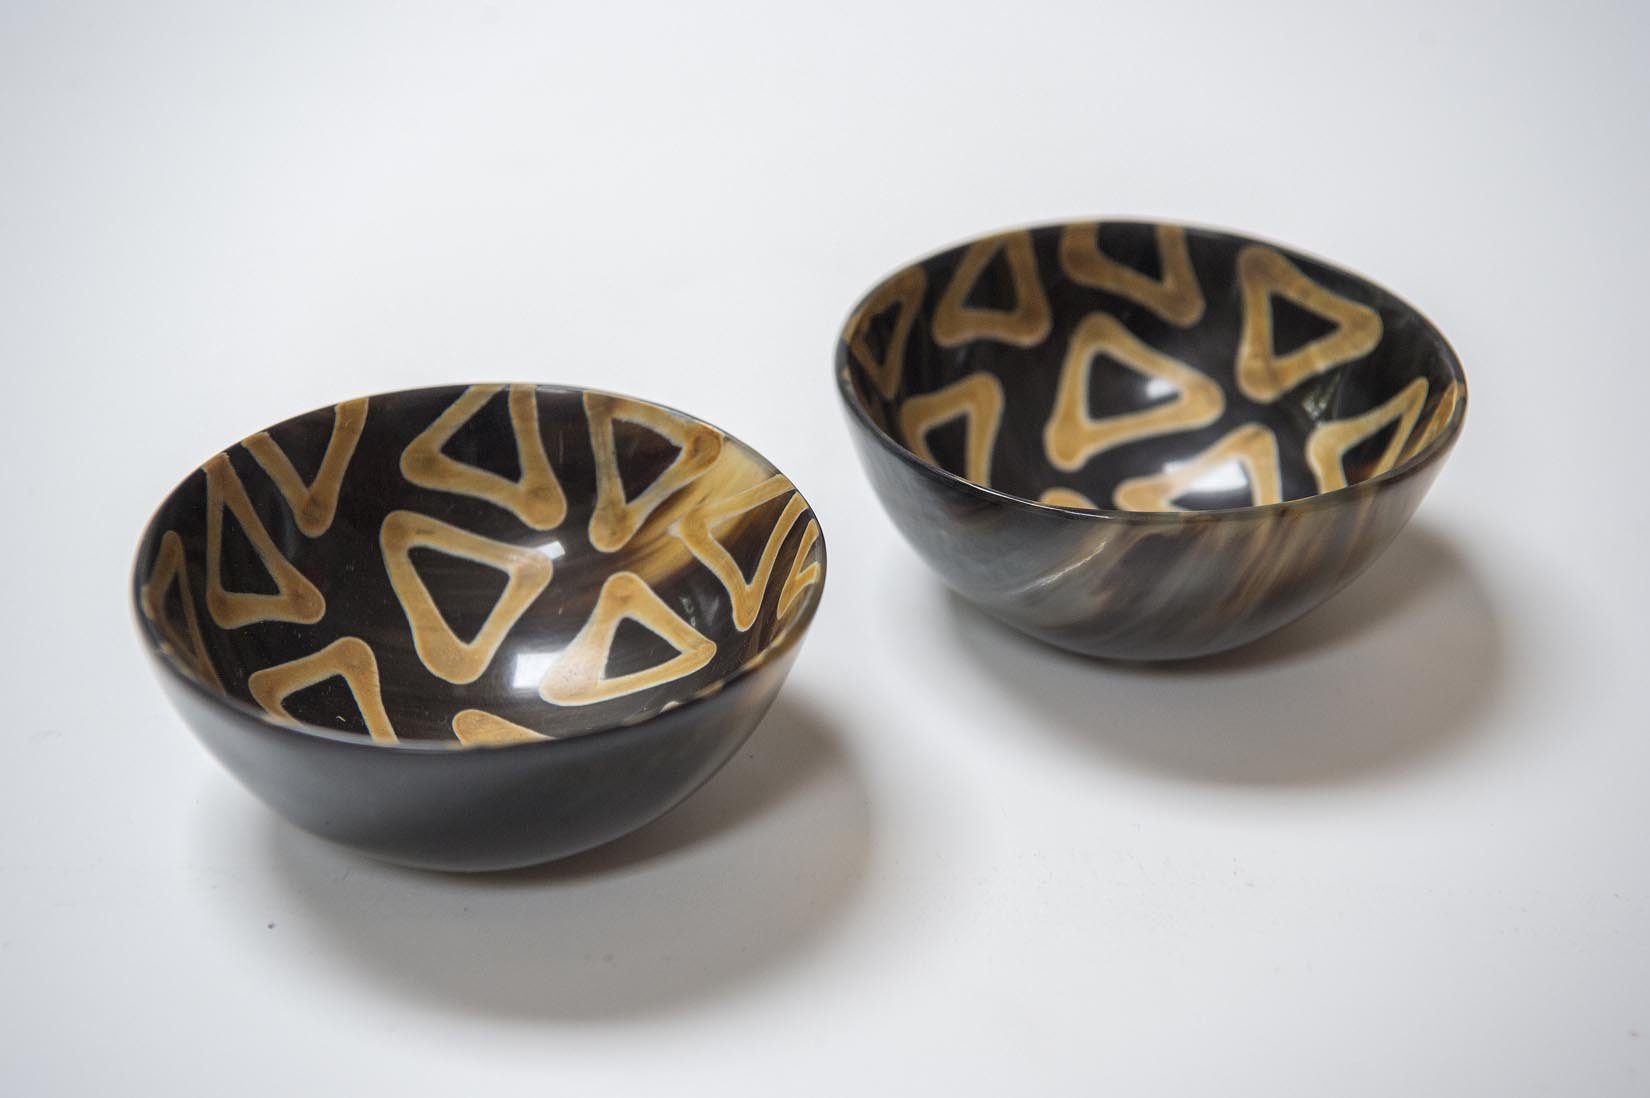 Horn bowl with an African pattern - Natalia Willmott